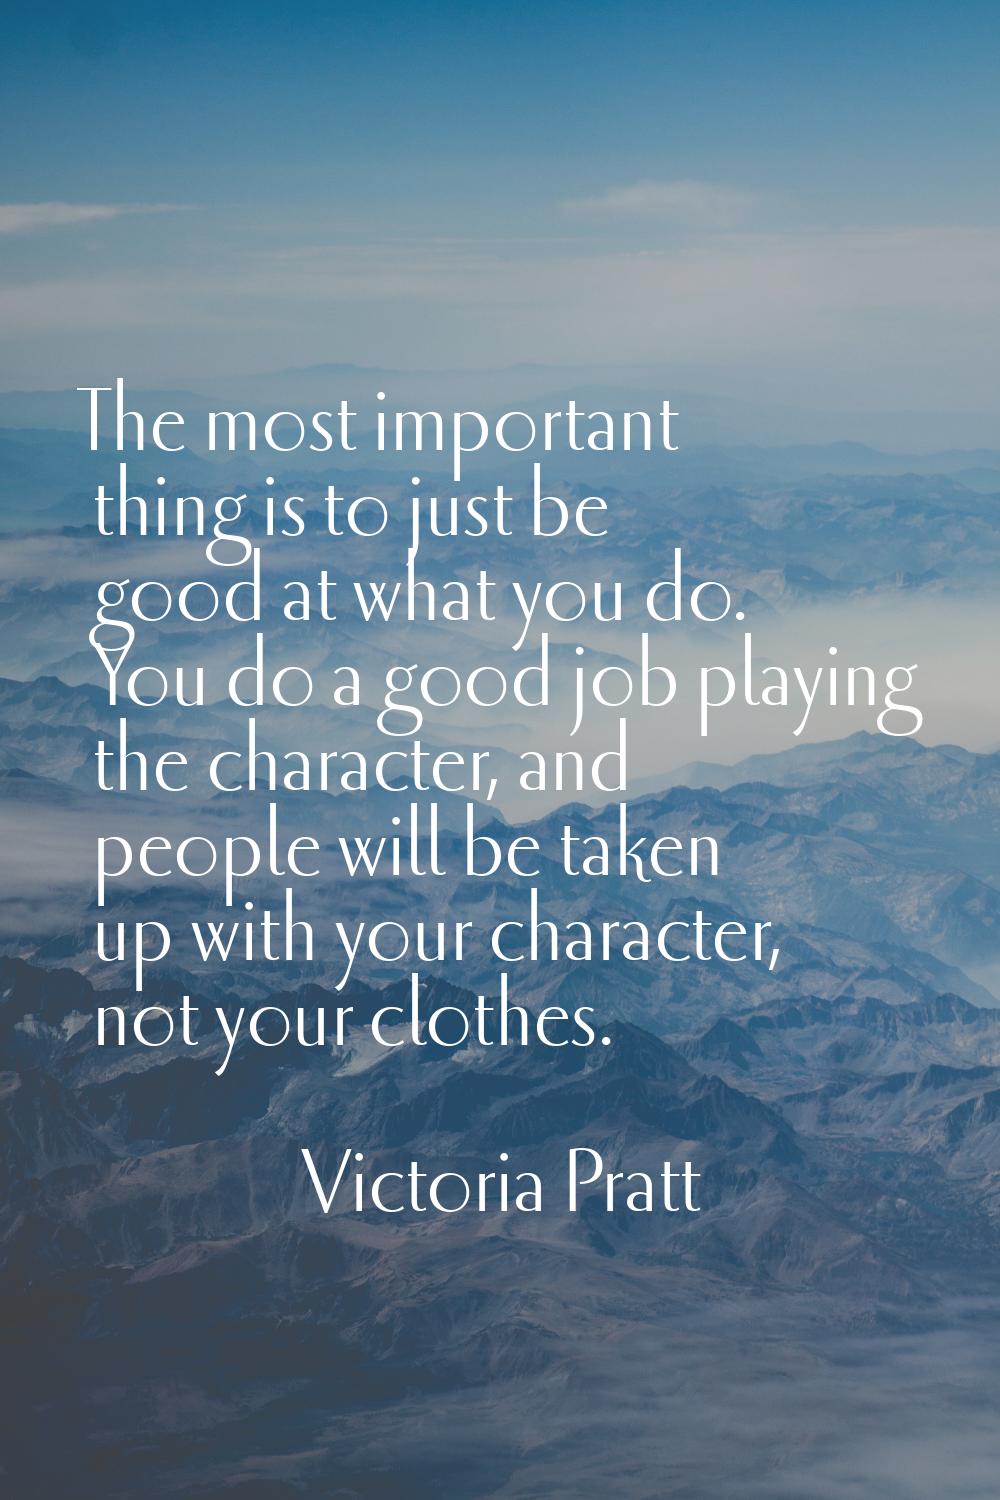 The most important thing is to just be good at what you do. You do a good job playing the character